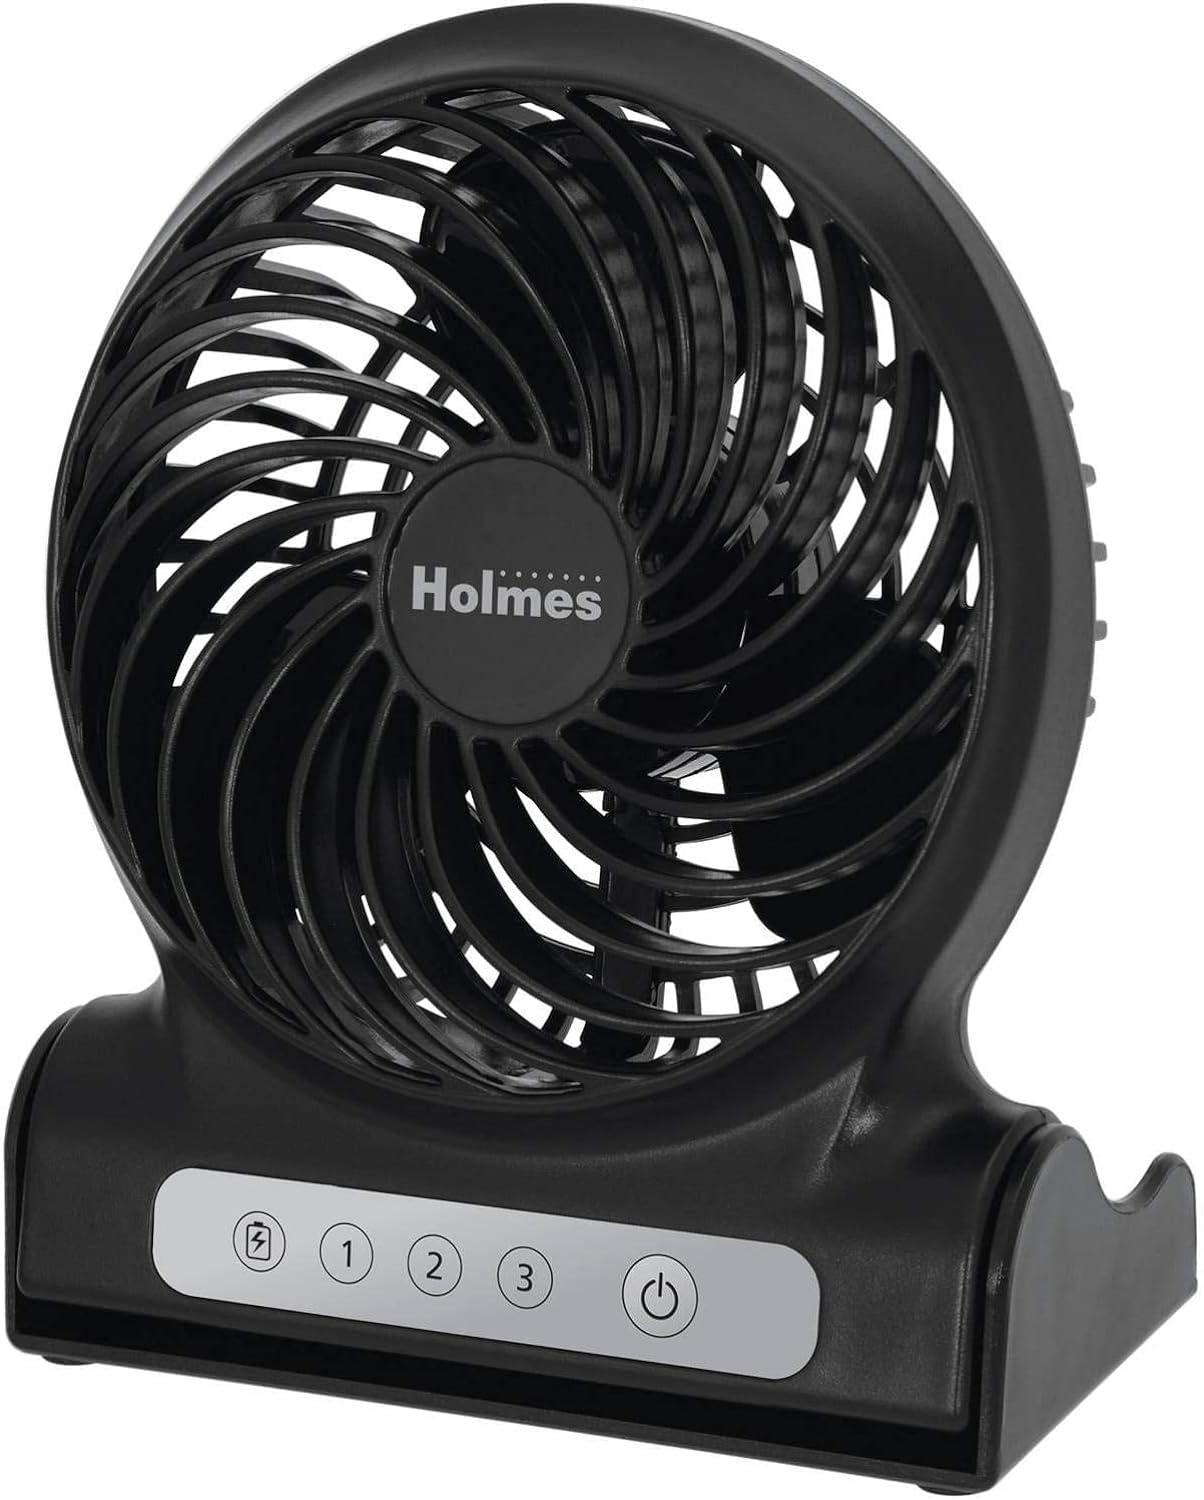 holmes 4" personal fan rechargeable battery operated - black